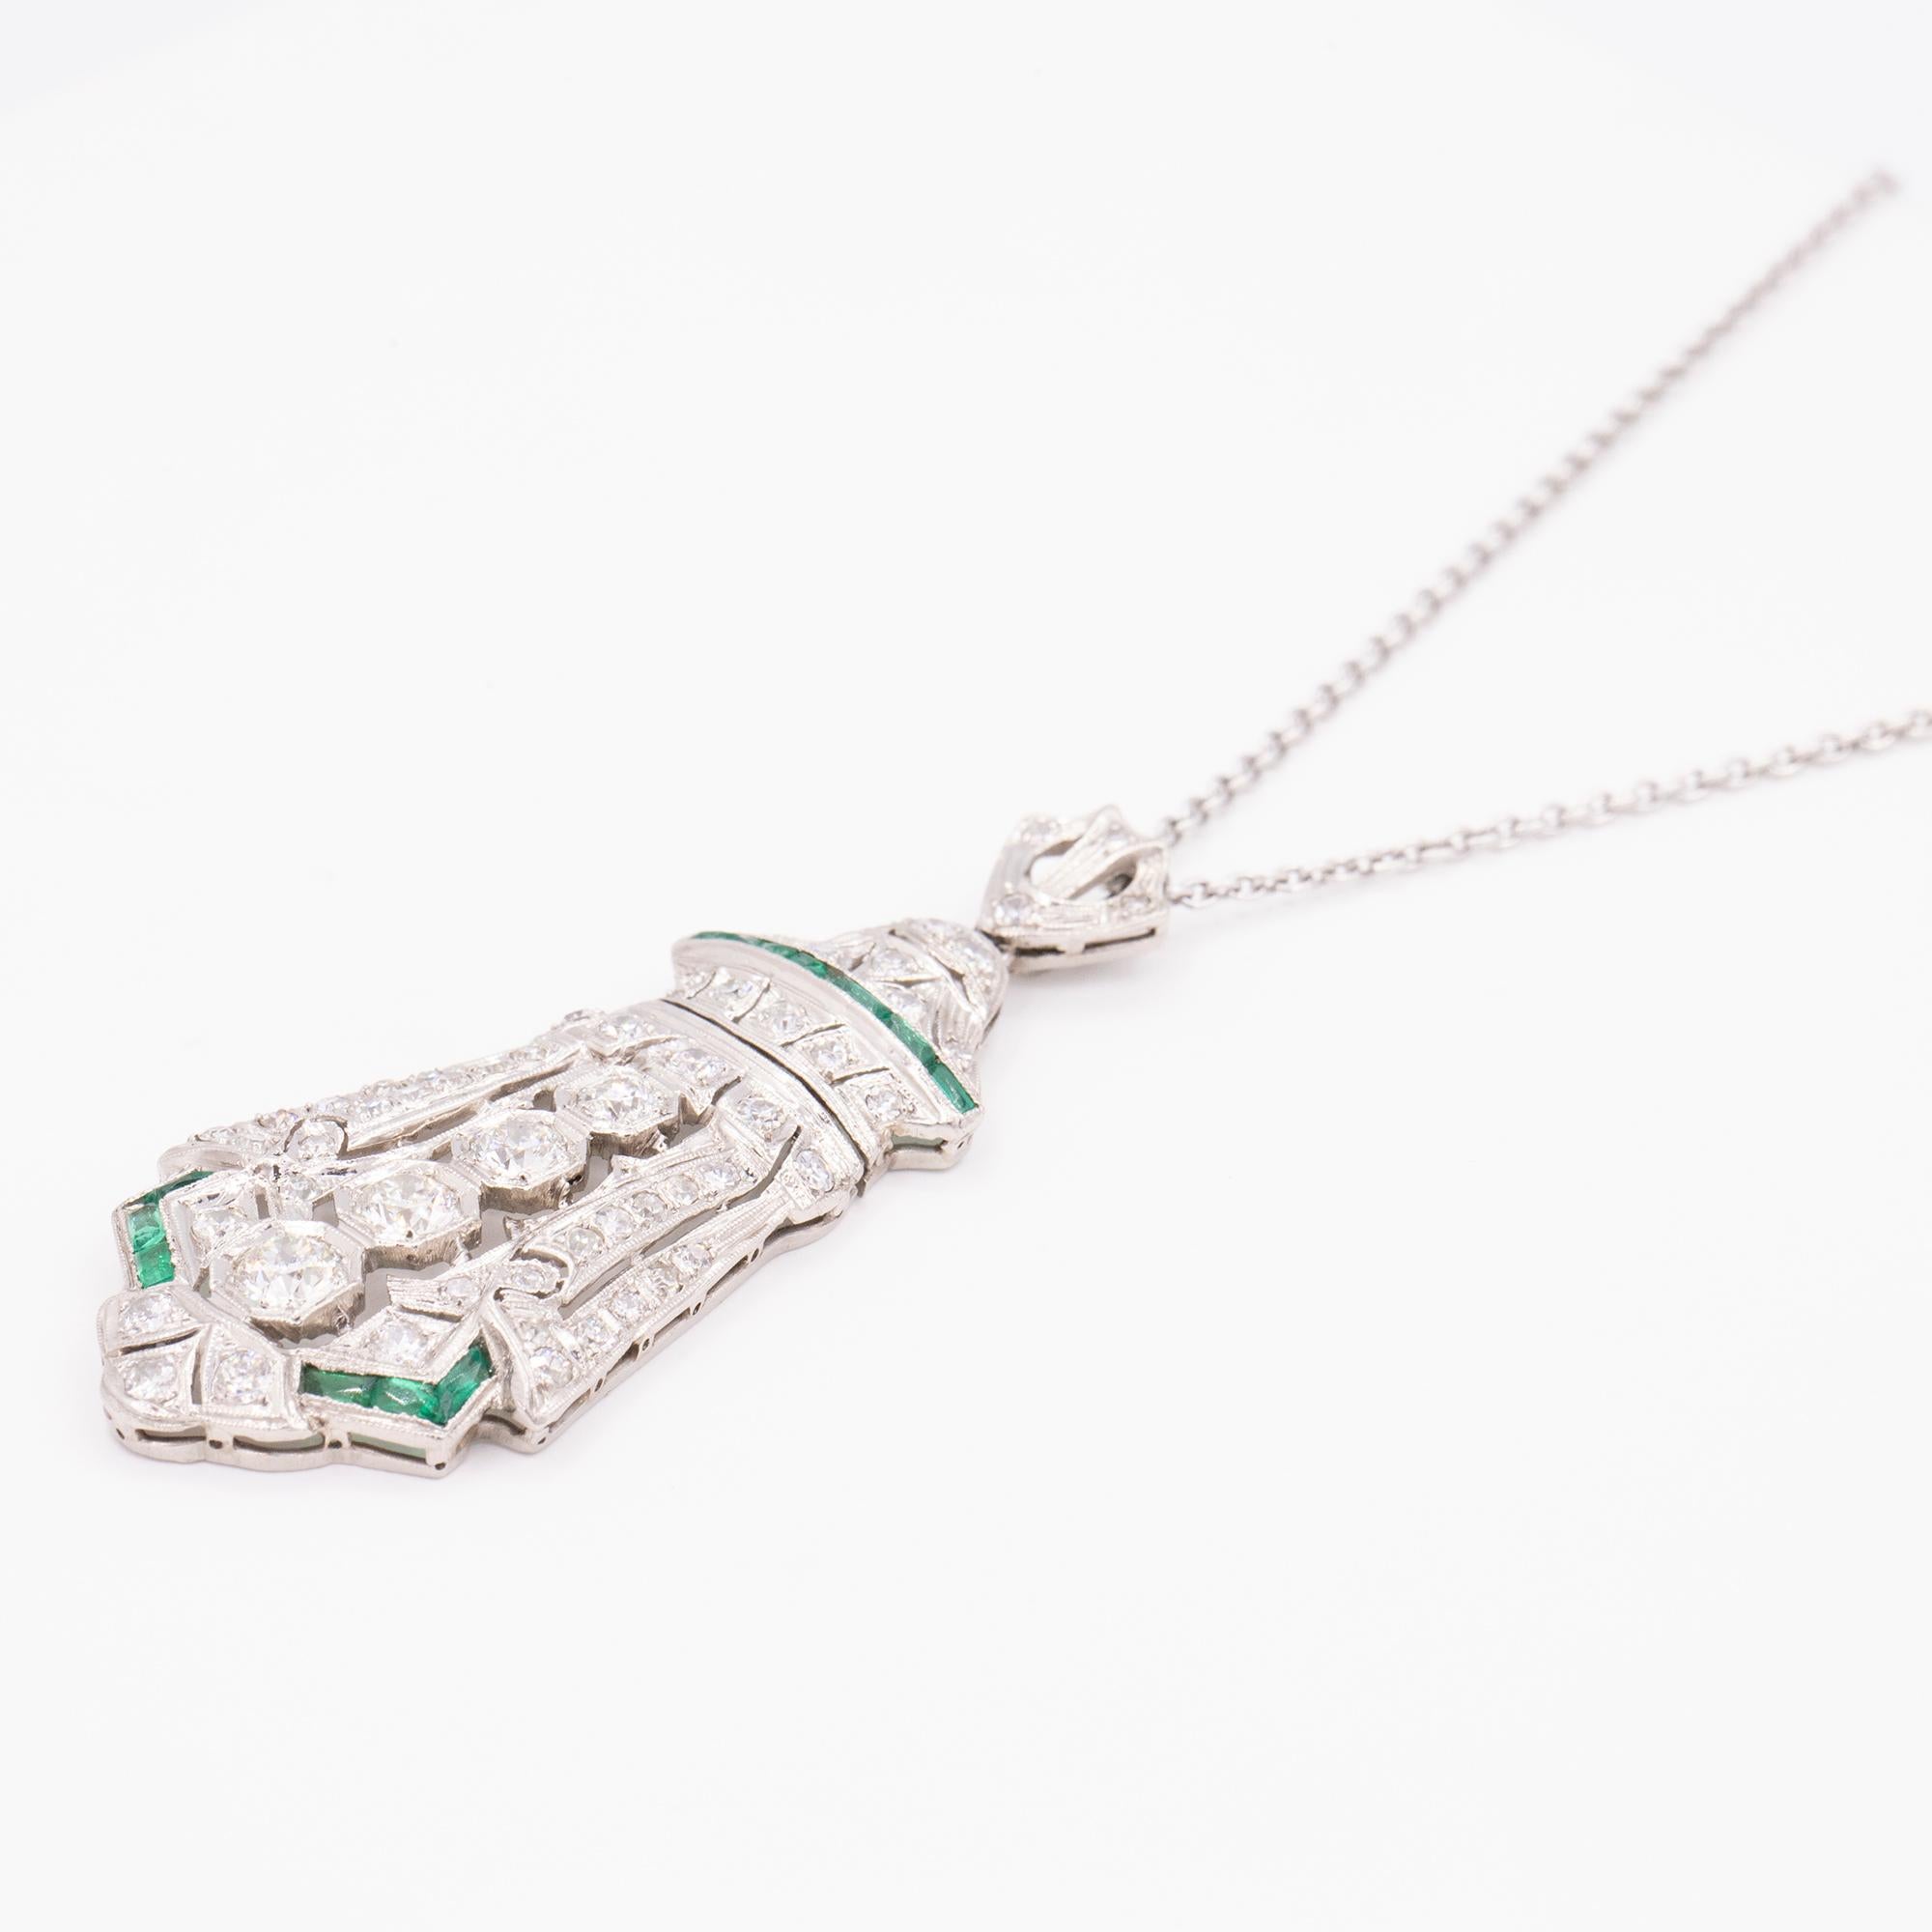 Vintage Diamond & Emerald shield shaped pendant. The pendant has 4 round diamonds weighing approximately 1.14 total carat weight with smaller diamonds weighing 1.06 total carat weight. The emeralds weigh approximately .55 carats in total weight.